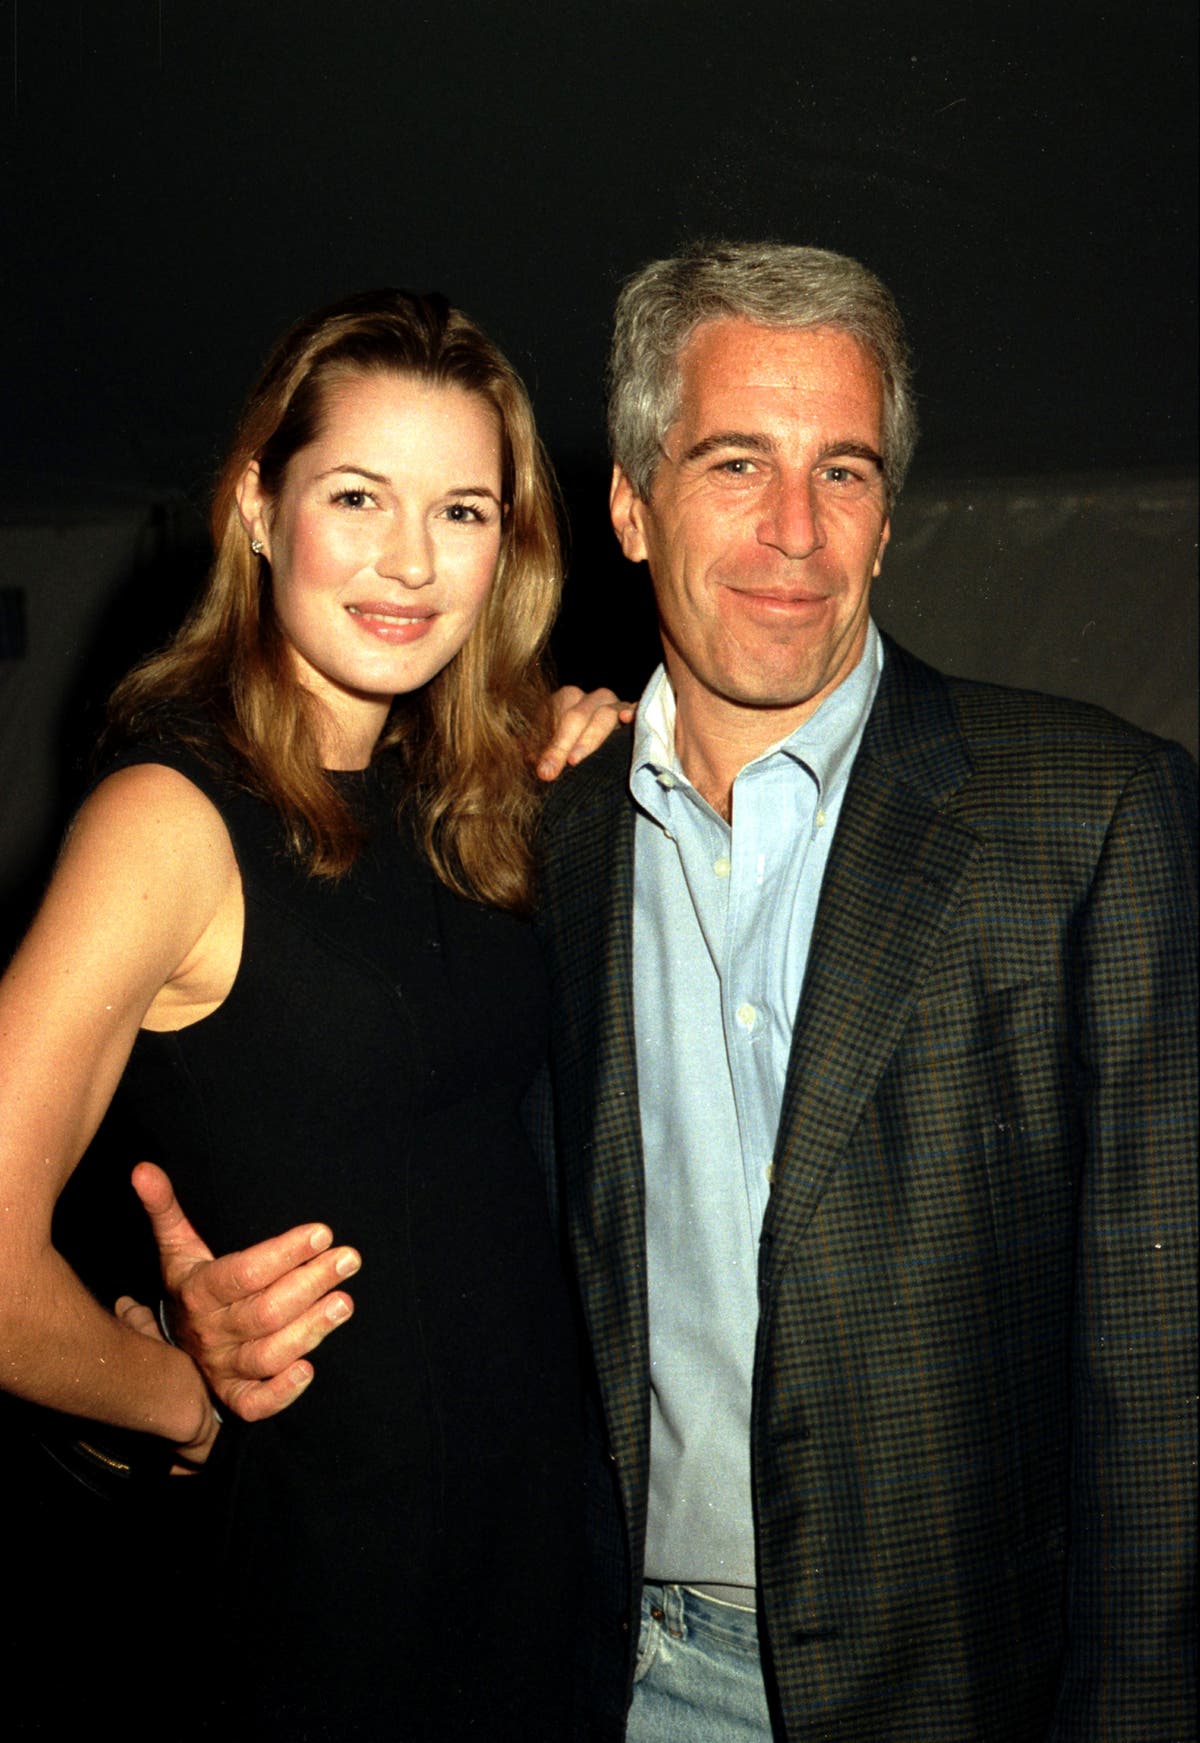 Epstein dated Norwegian heiress at same time as Maxwell, 法庭审理 